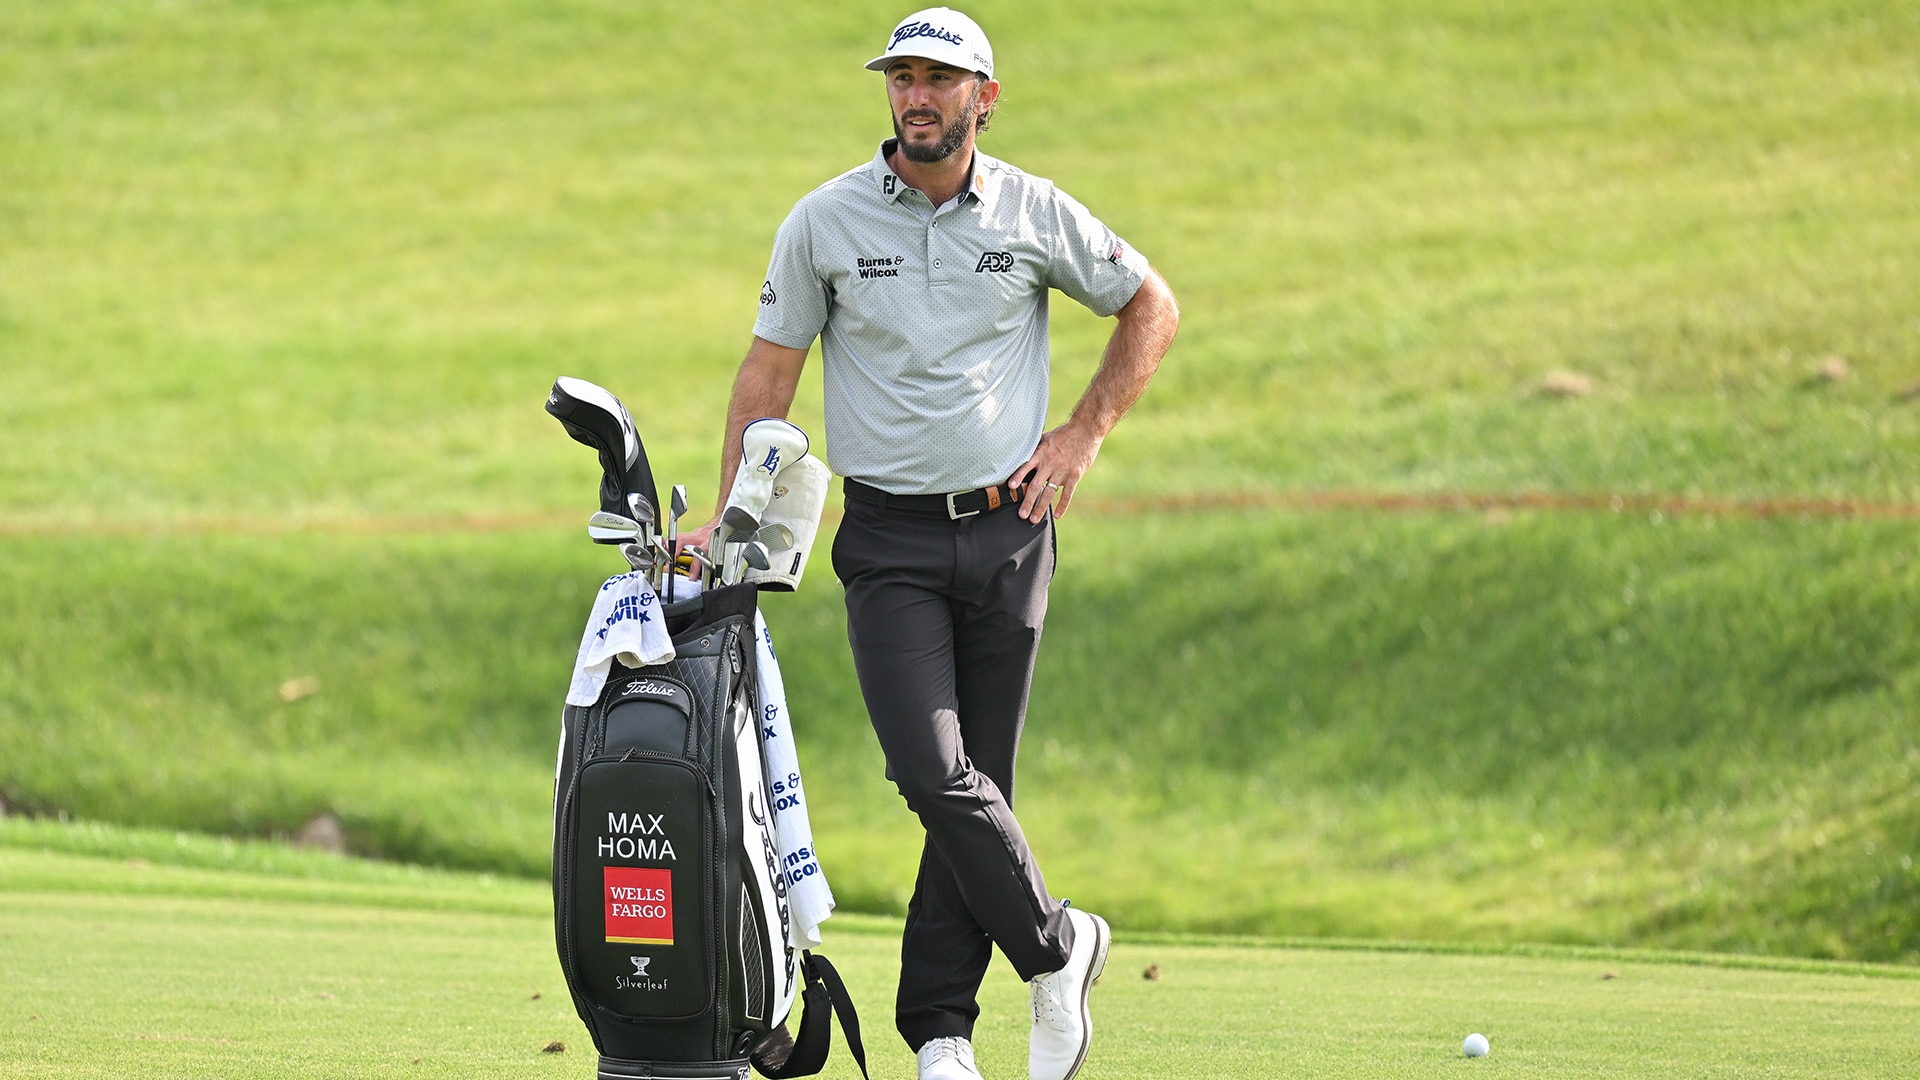 Max Homa gets into contention Friday at Quail Hollow: ‘I just love this place’